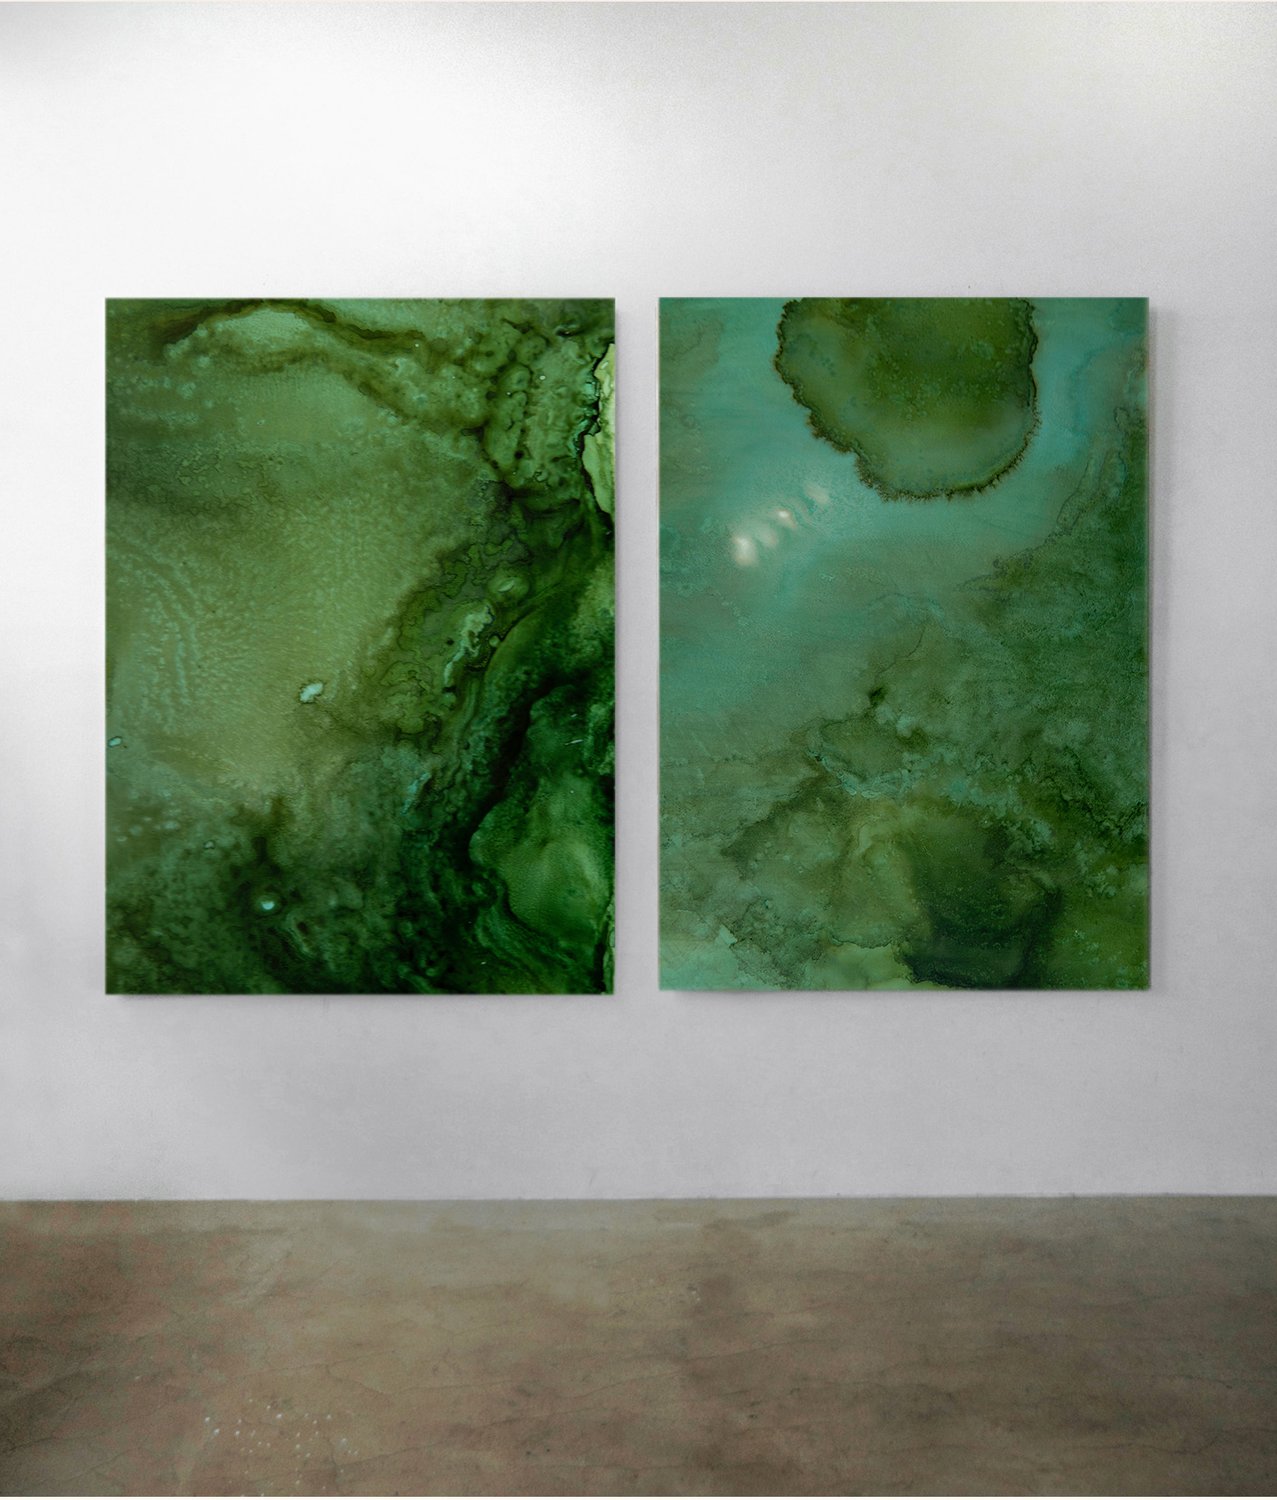 Kim Rose's 2 artworks in green hanging up on wall